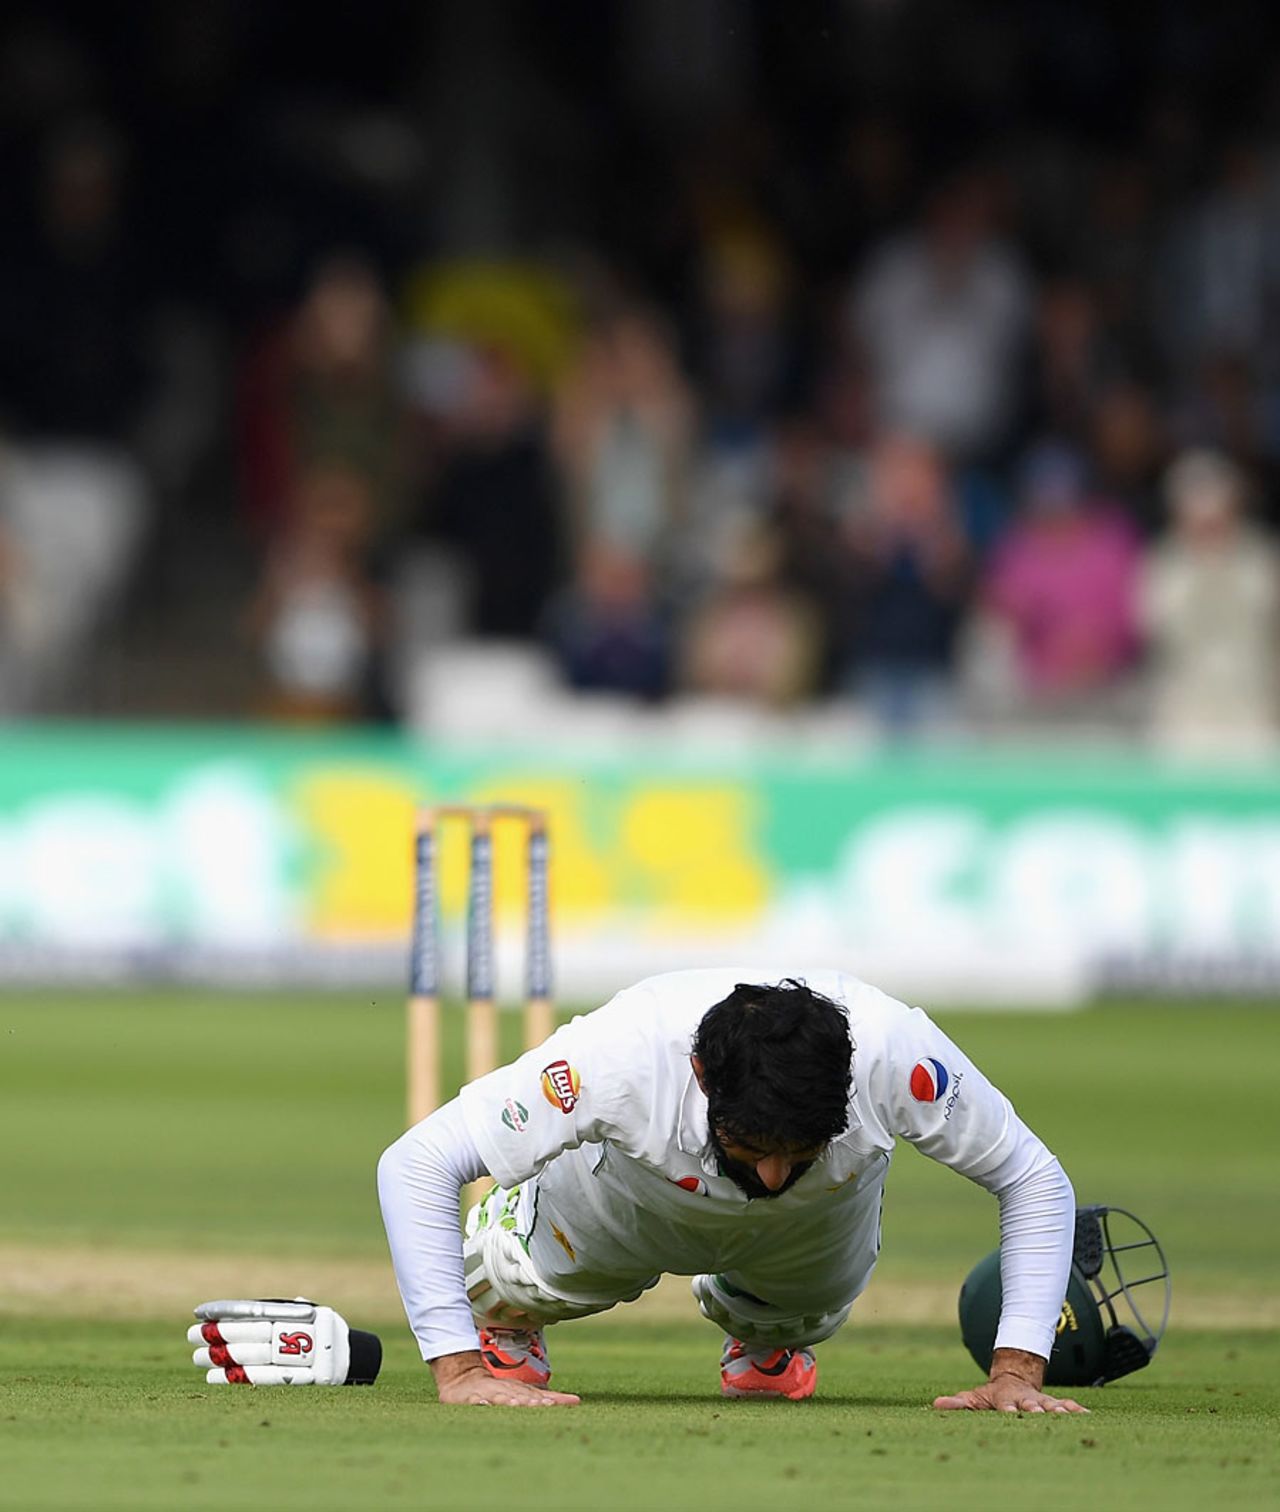 Misbah-ul-Haq marked his hundred with a set of push-ups, England v Pakistan, 1st Investec Test, Lord's, 1st day, July 14, 2016